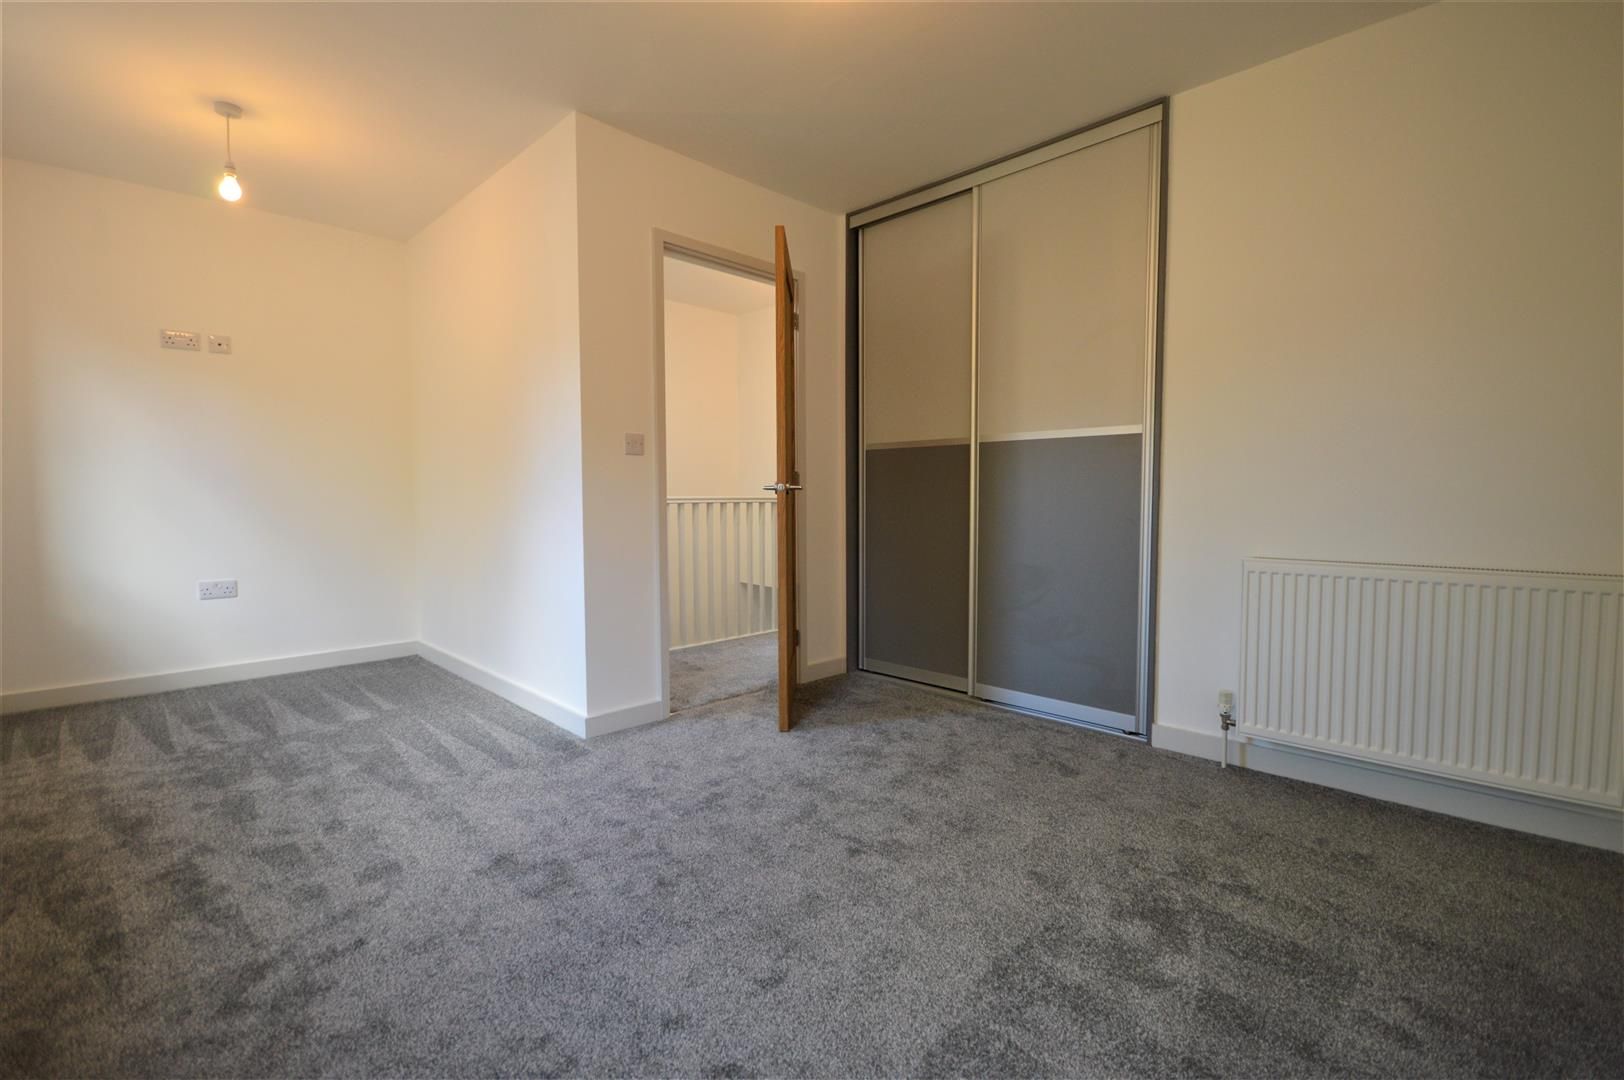 2 bed terraced for sale in Leominster 9